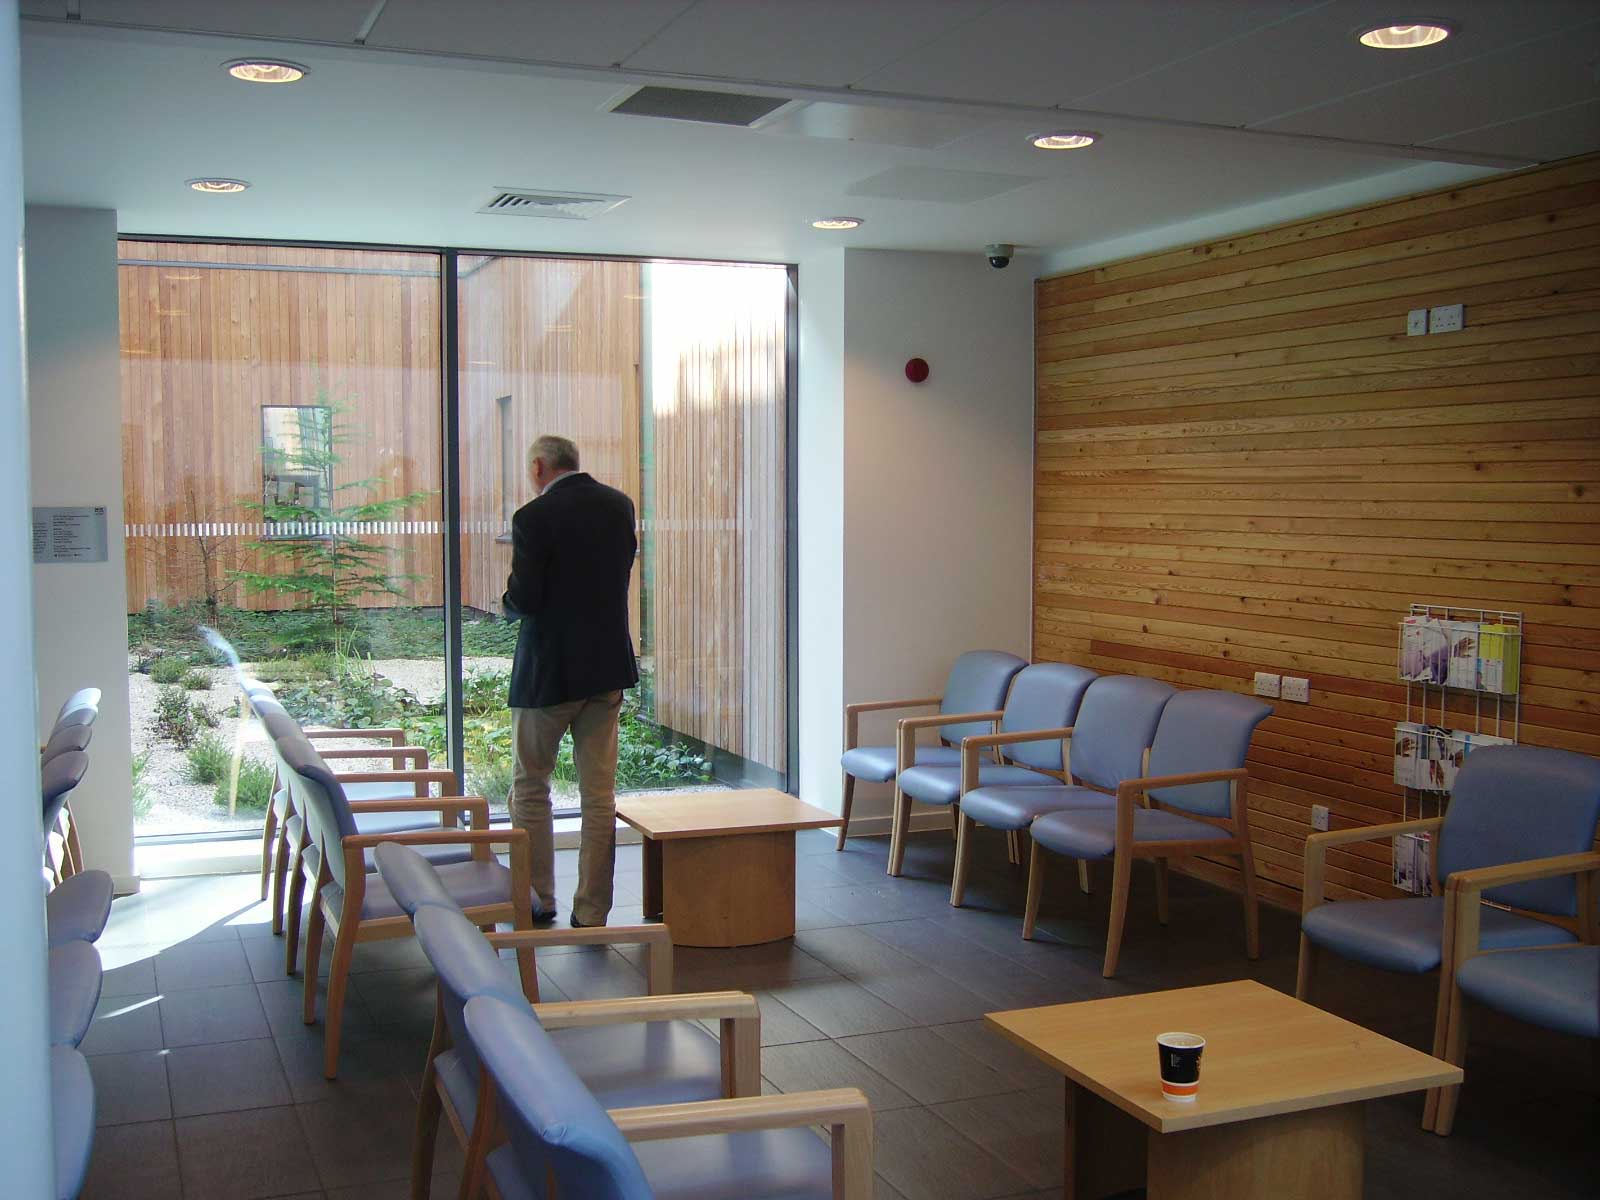 A waiting area with a large window looking out into a garden space, a man stands in front of the window